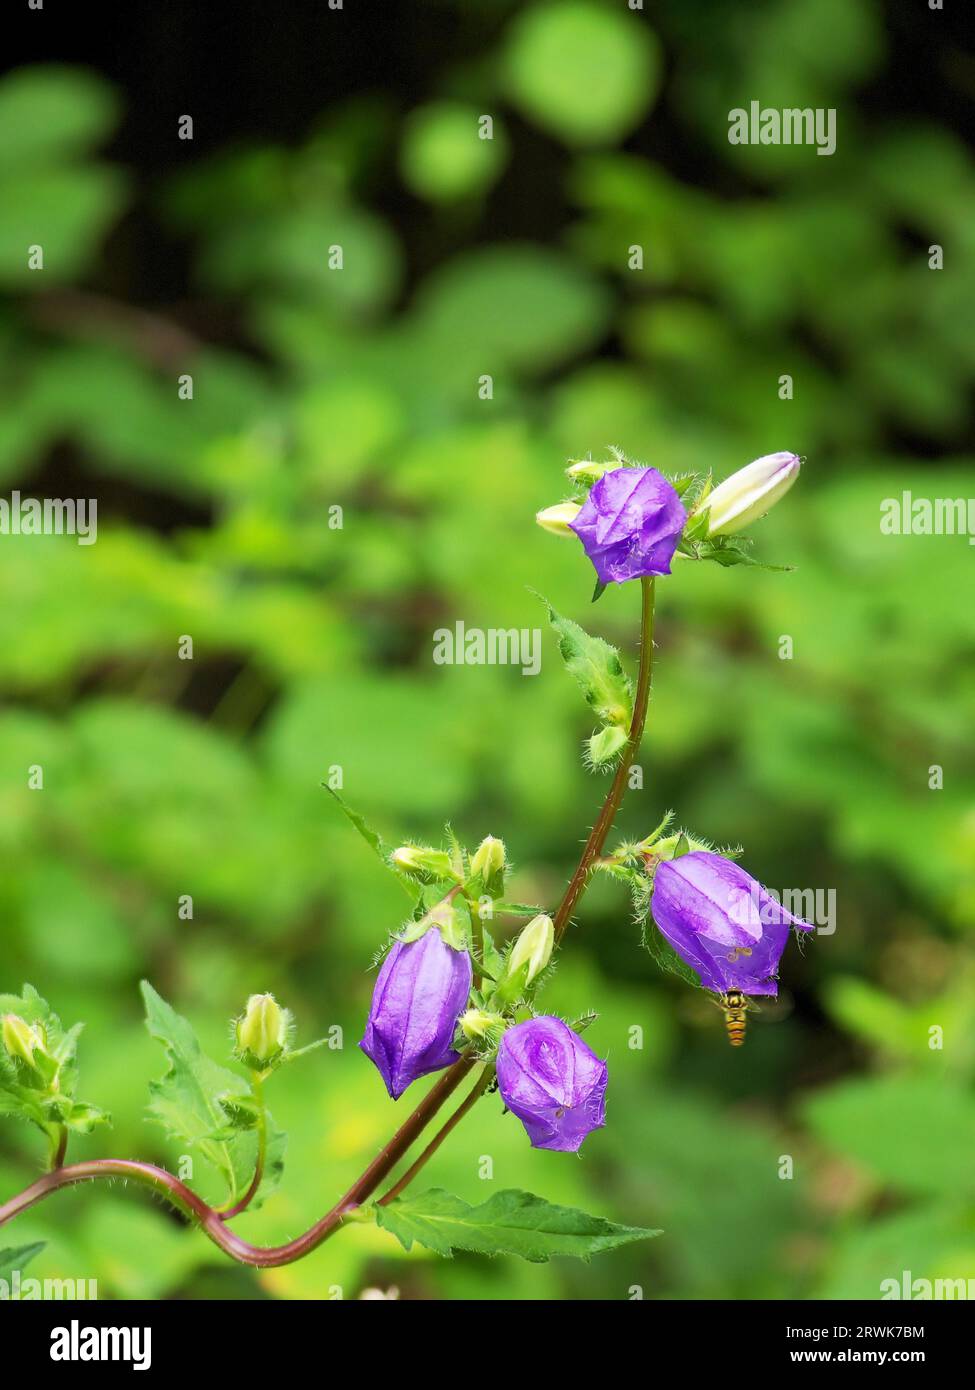 Light purple bellflower with slightly closed flowers, background shrubs and grasses in blur Stock Photo